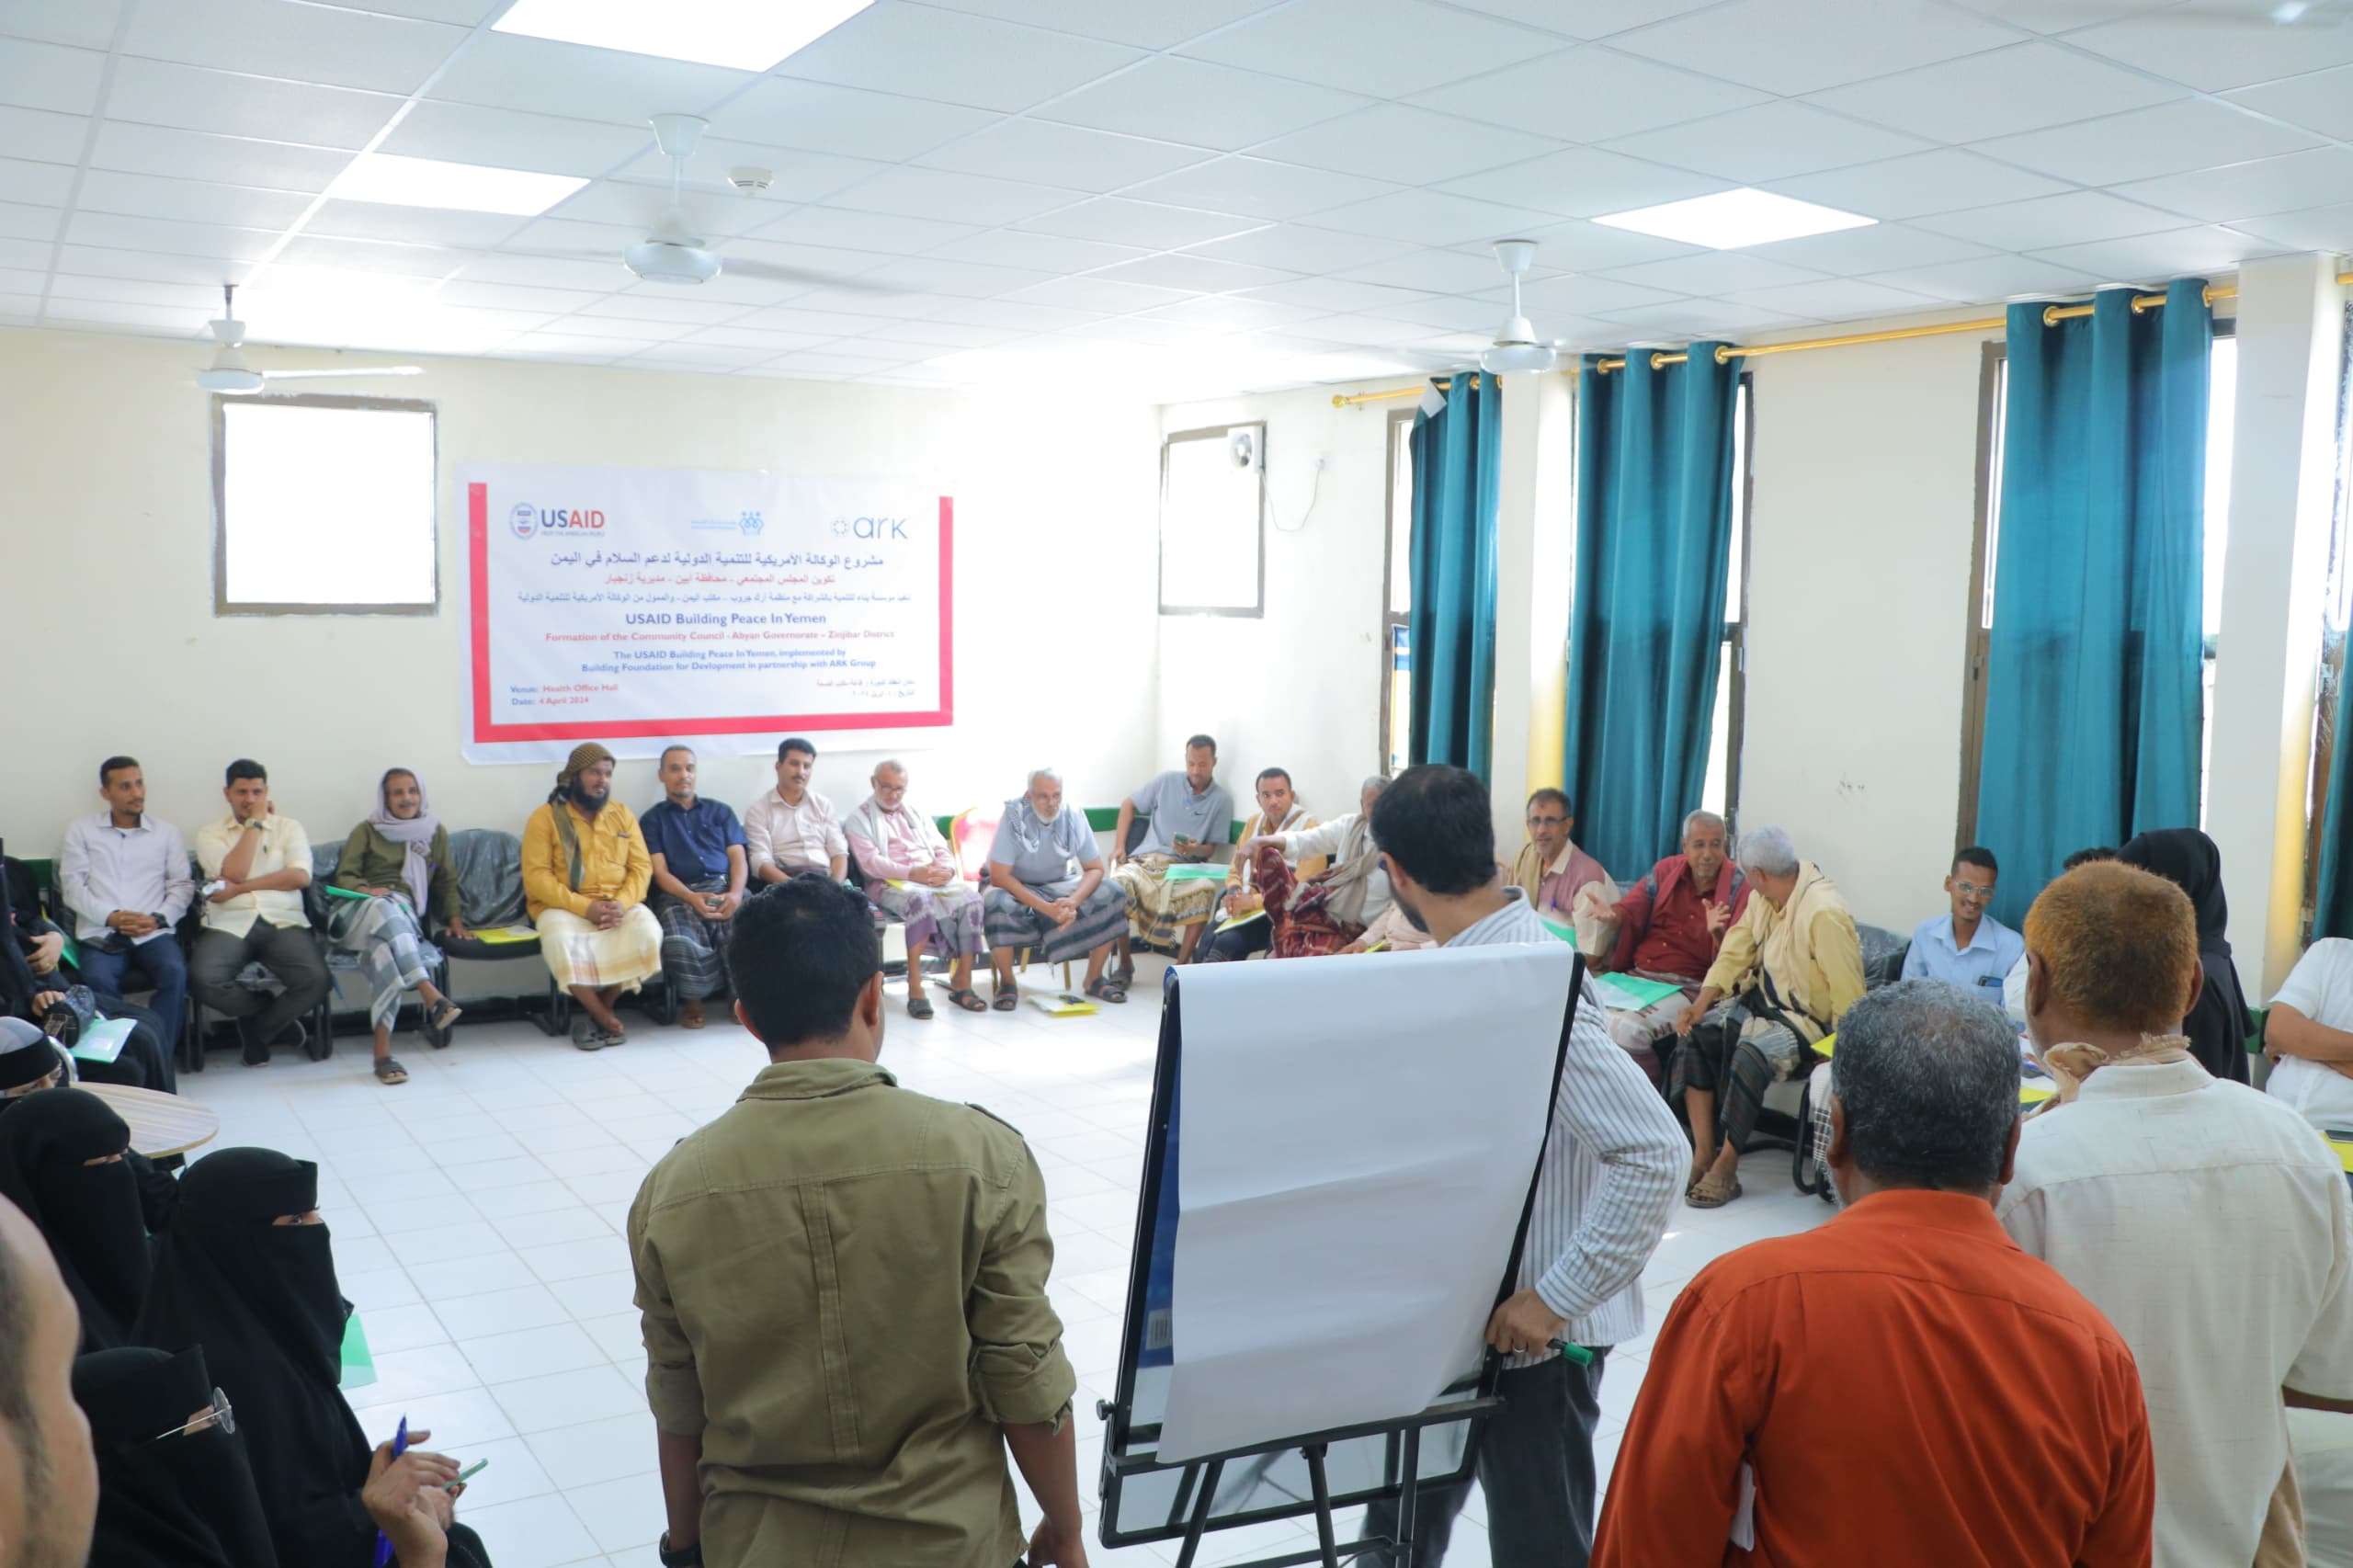 Funding from the United States Agency for International Development, a Community Council was Formed to Address Climate Change in Zinjibar District, Abyan